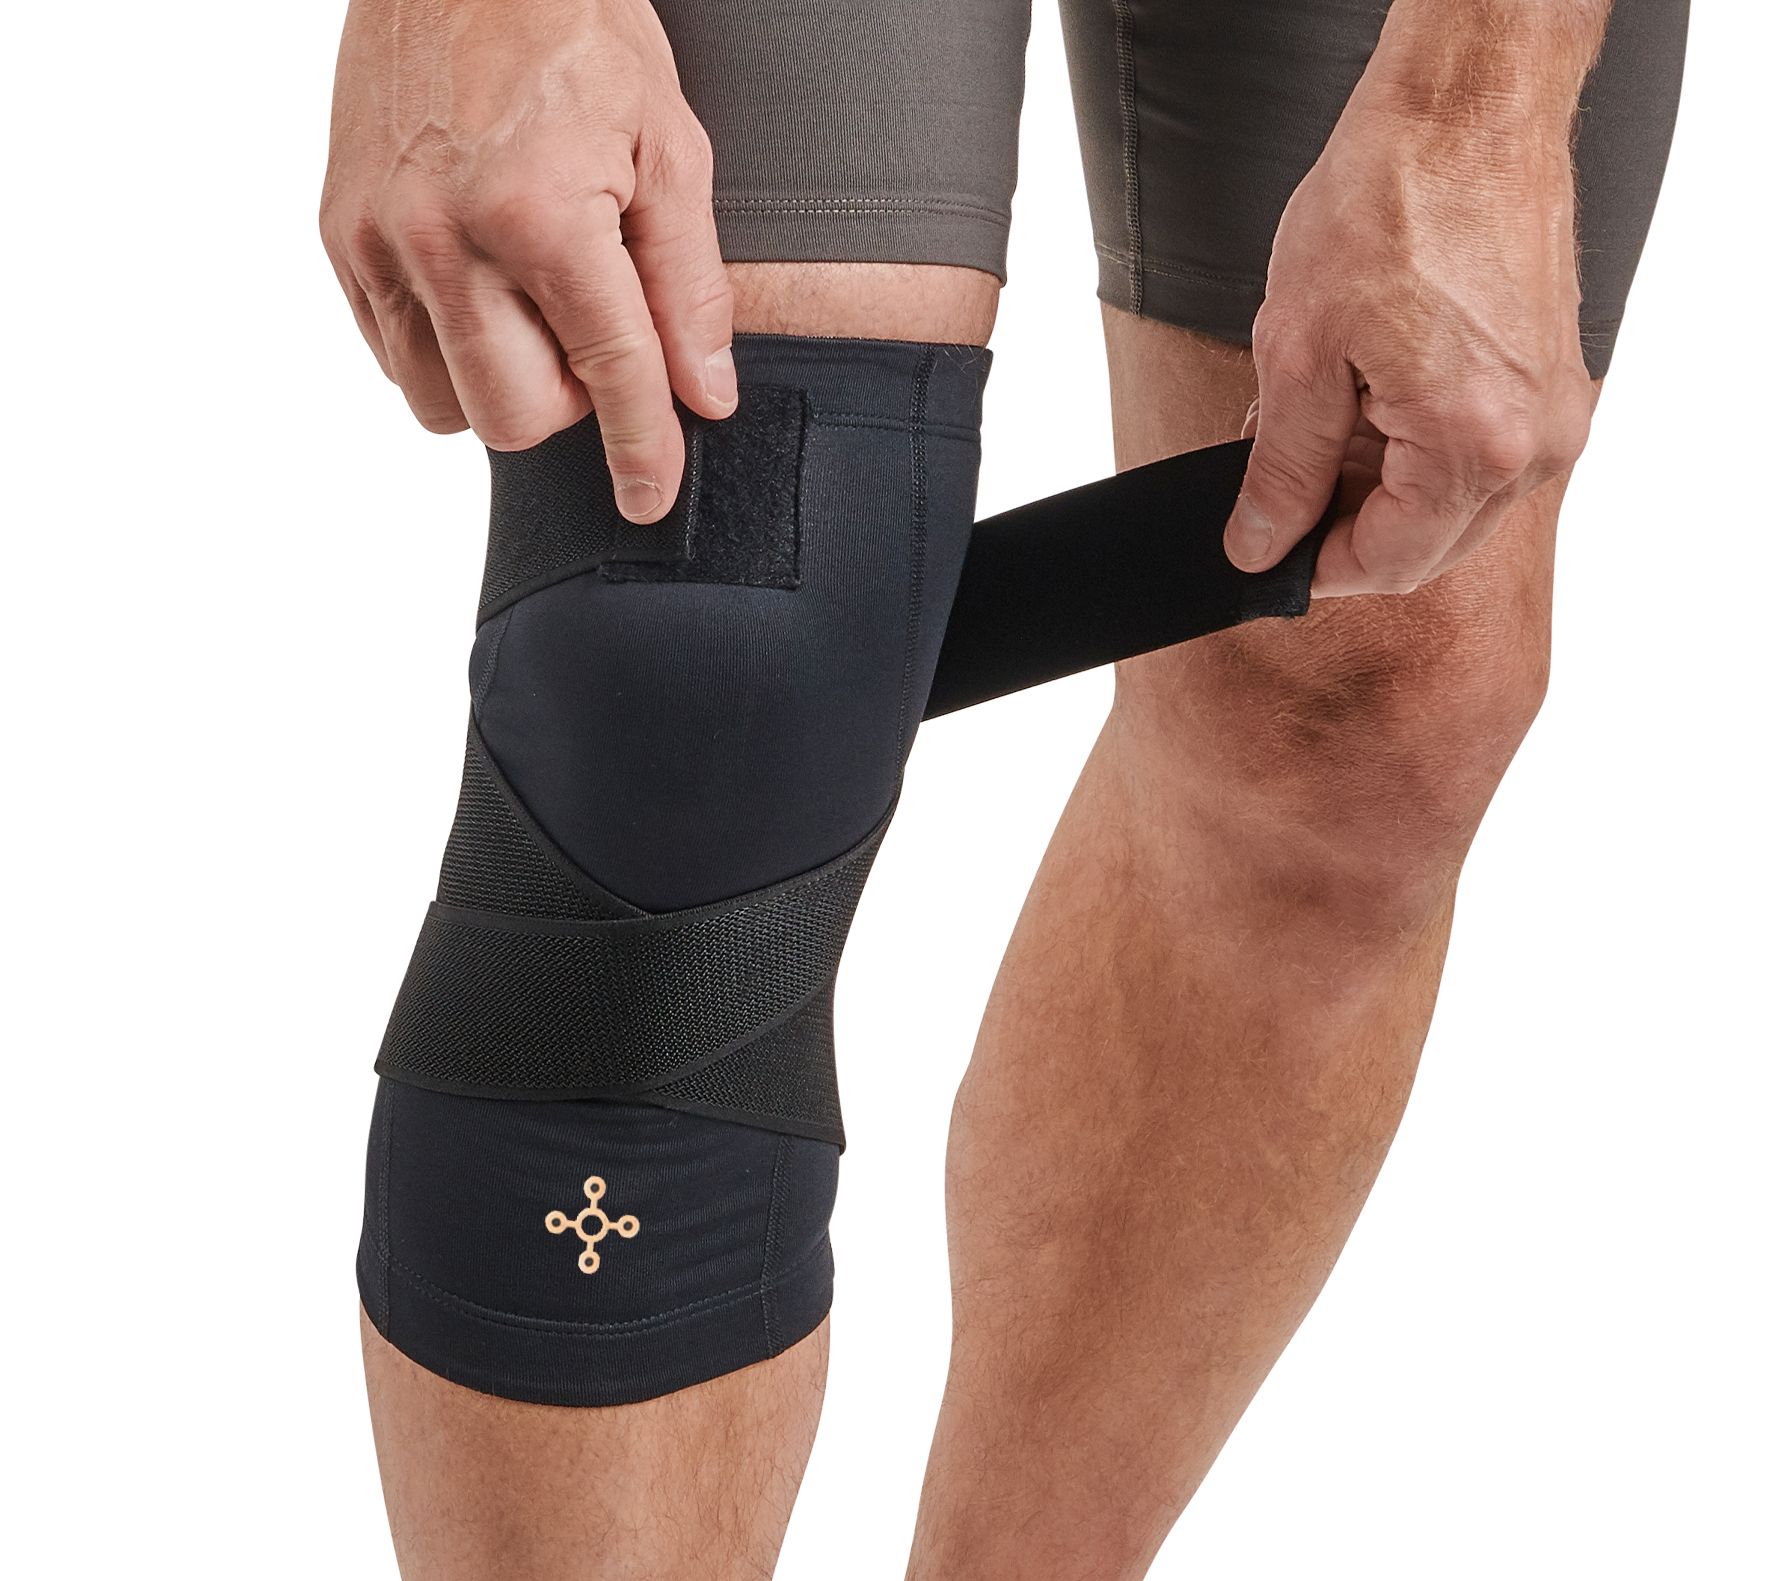 Tommie Copper Knee Sleeve Men's Performance Compression Brace Pro Fit  Support